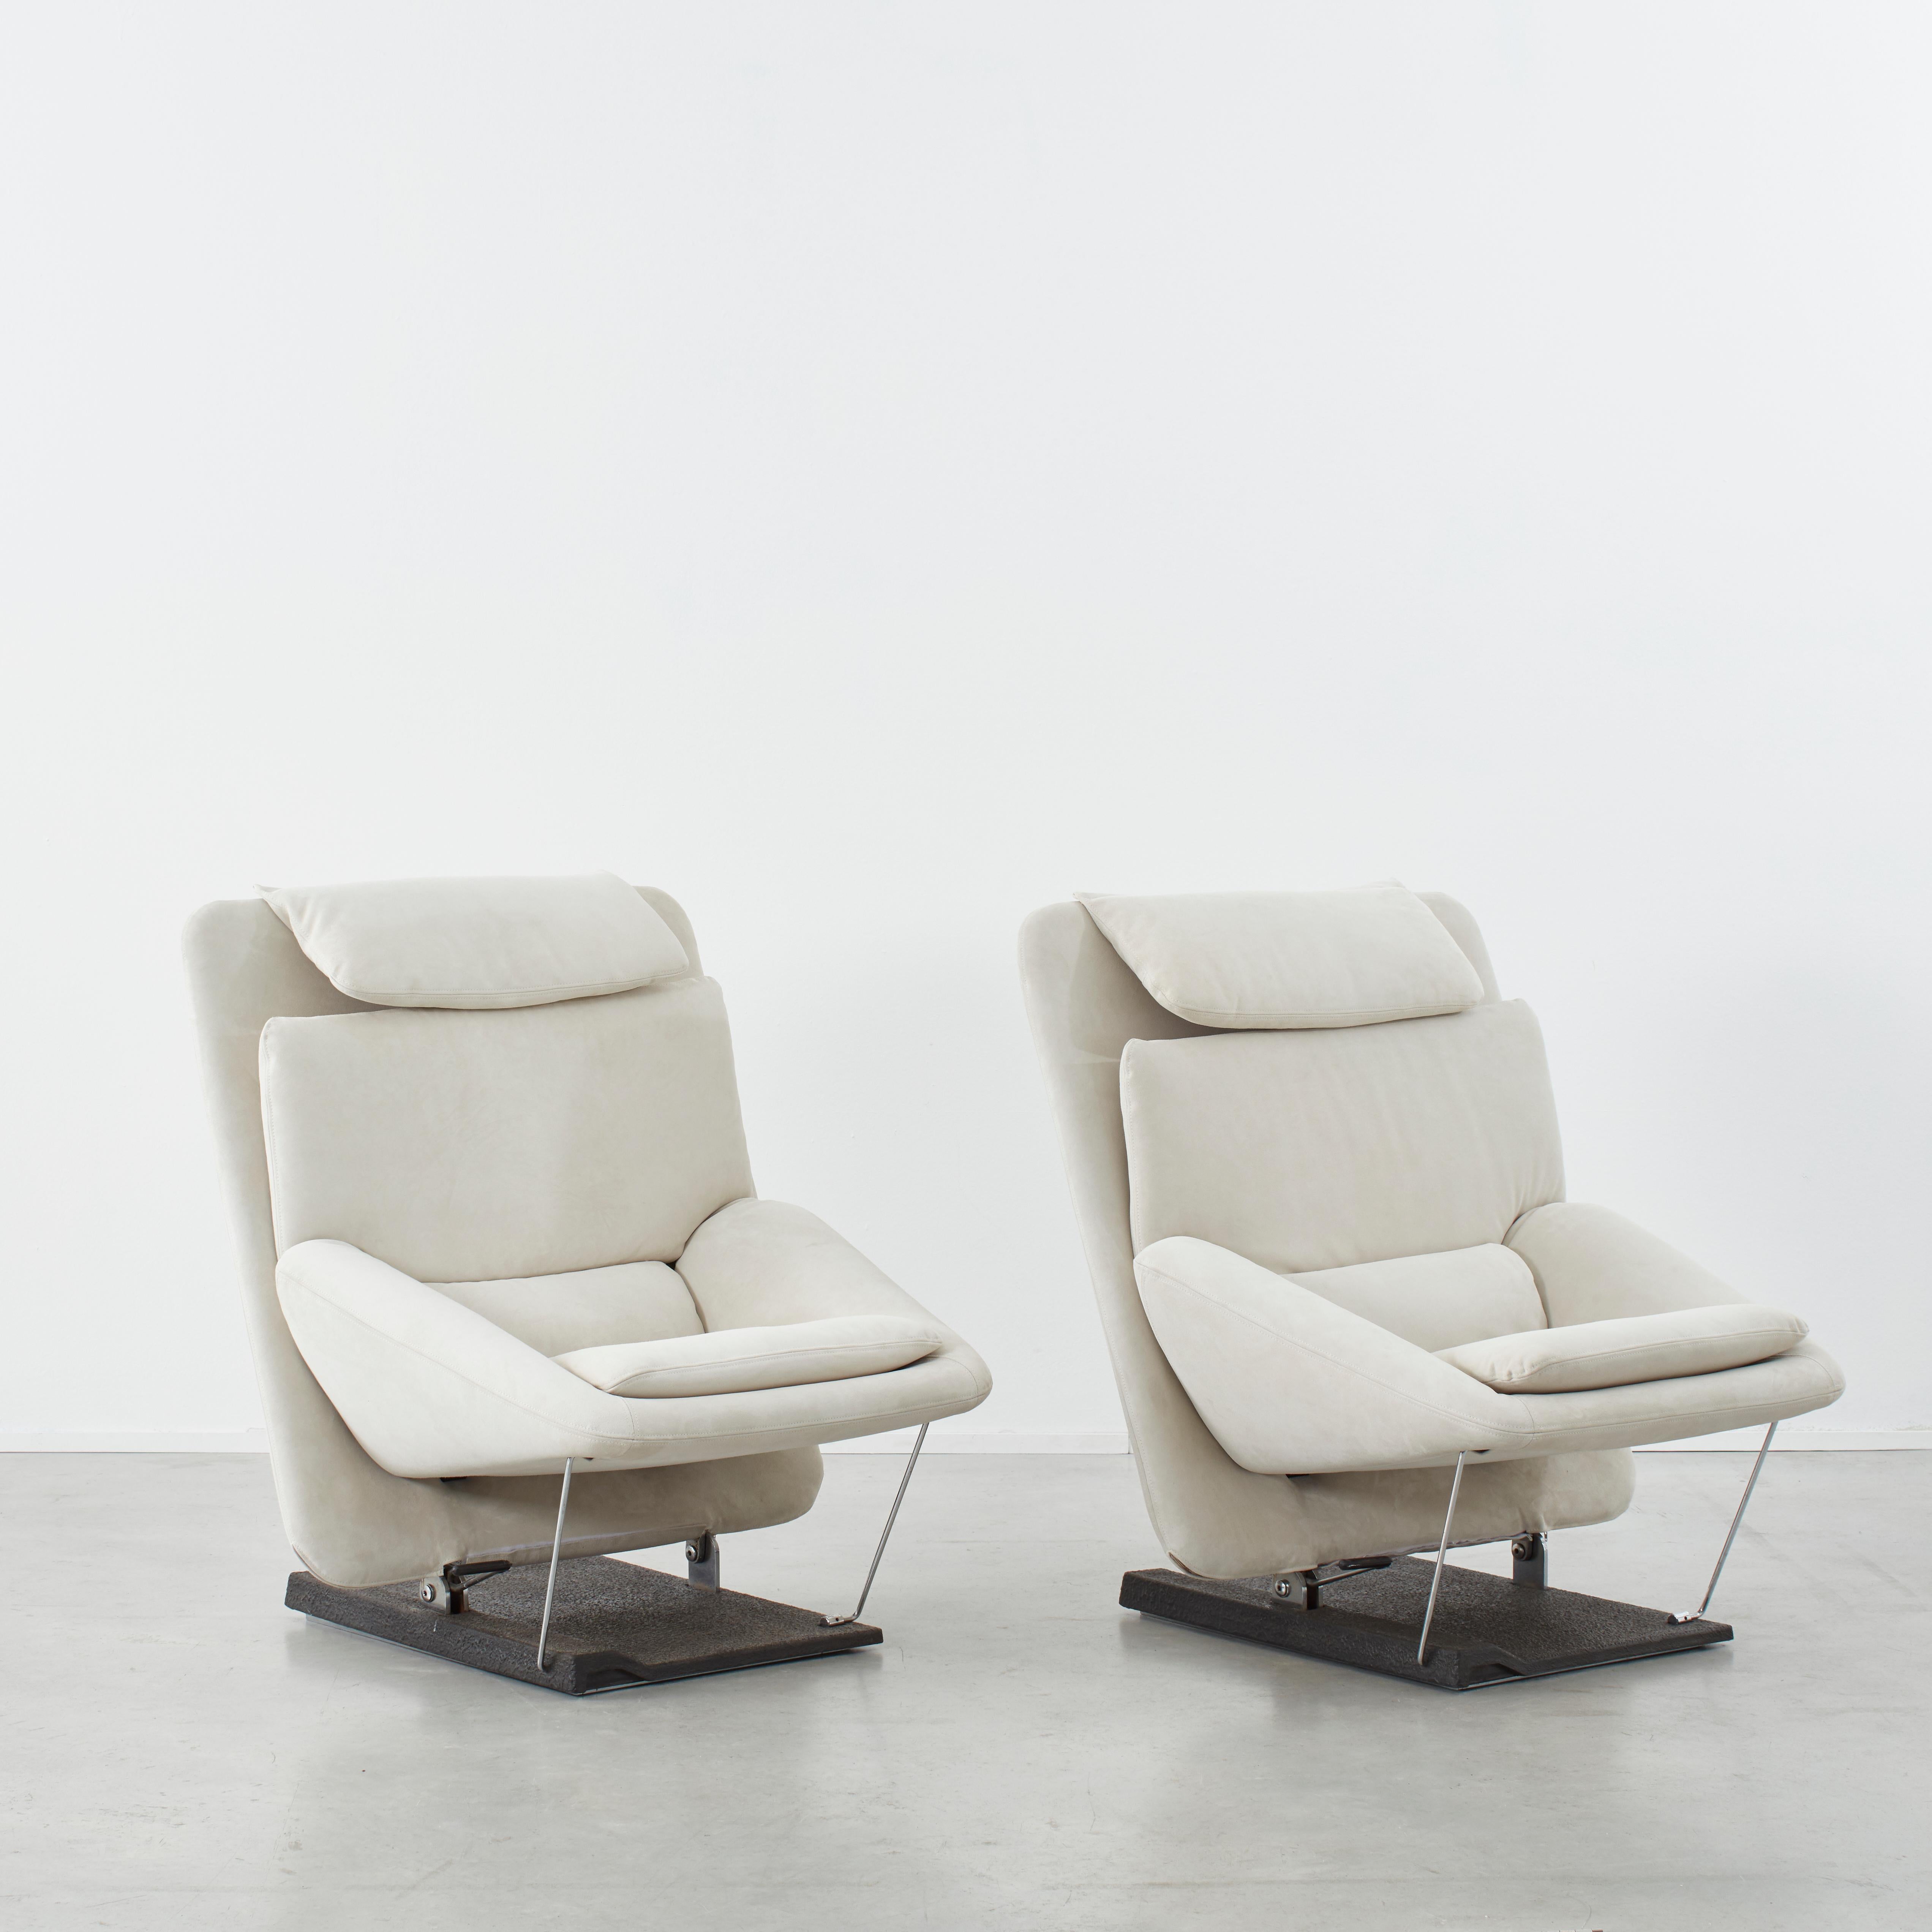 This stunning pair of lounge chairs will probably be the most comfortable thing you have ever sat in. The chair’s rectangular body looks minimal and clean from the back whilst there is a slight hint of a futurist aesthetic from the front. The seat